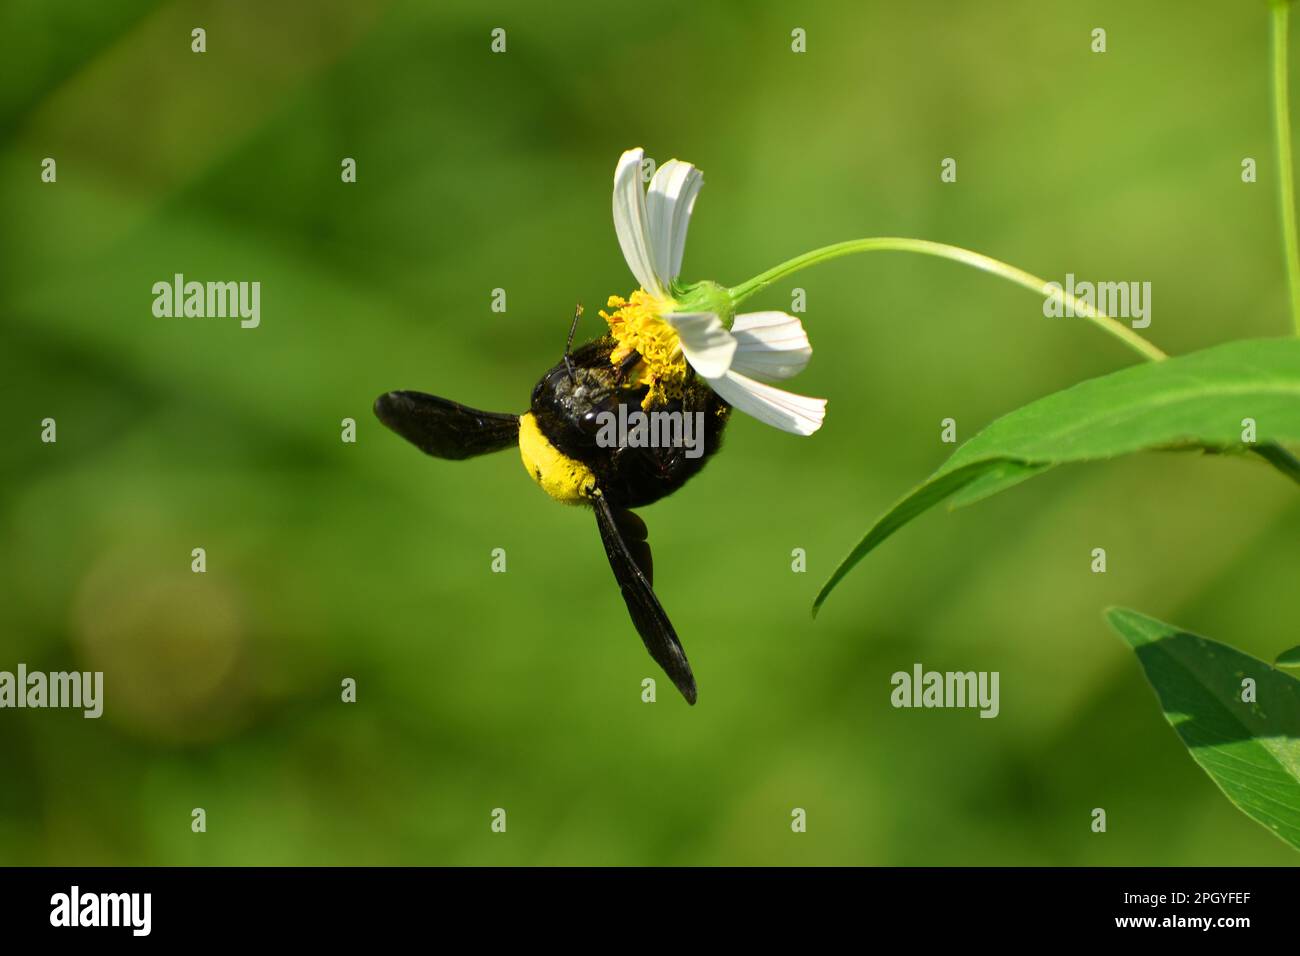 A carpenter bee visiting devil's claw flower. Surakarta, Indonesia. Stock Photo